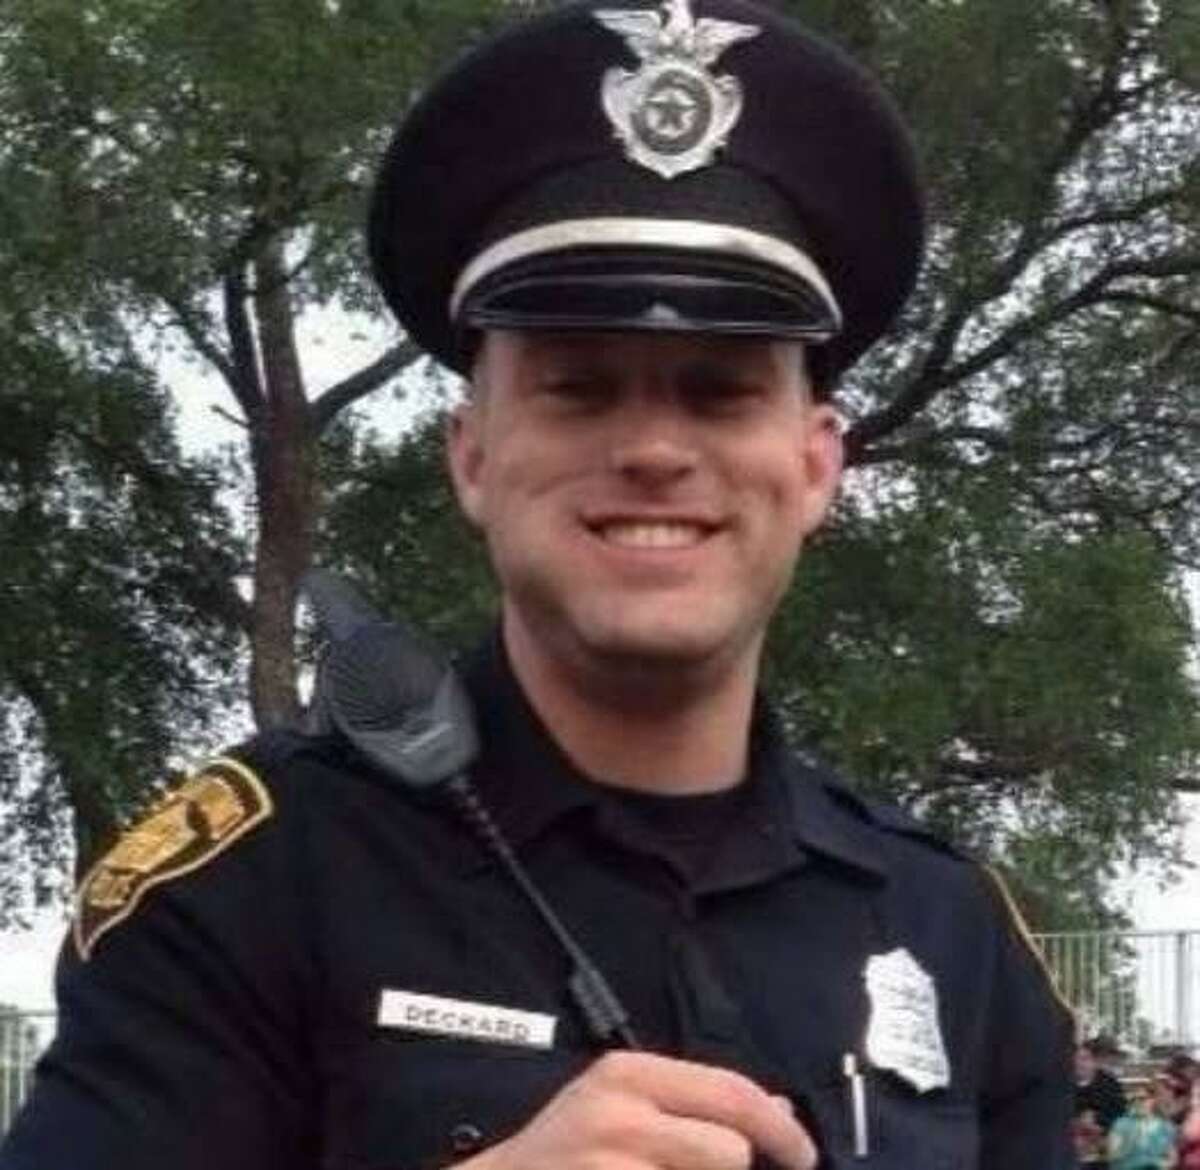 San Antonio Police Officer Bobby Deckard is seen in an undated photo provided by the San Antonio Police Department Dec. 20, 2013. Officer Deckard died Dec. 20 at SAMMC from wounds he suffered after being shot in the head Dec. 8 while pursuing armed robbery suspects.